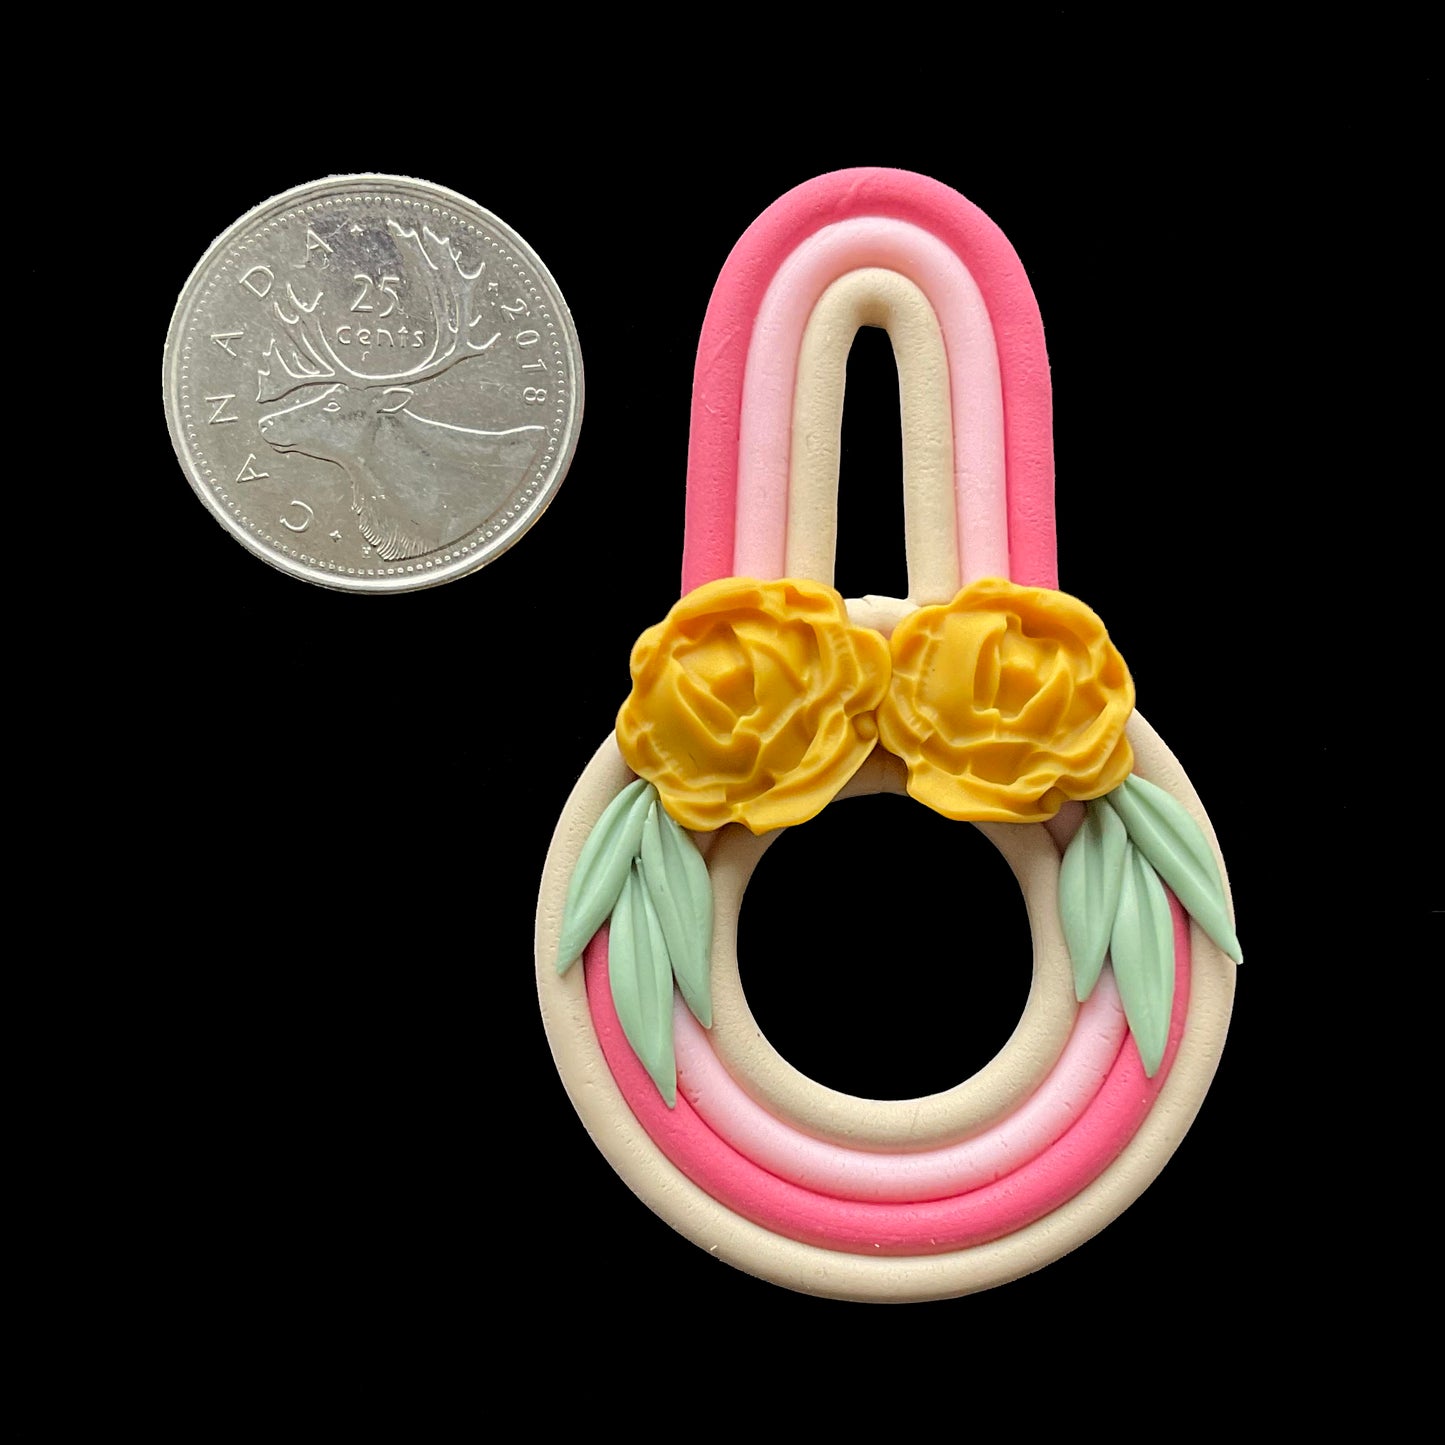 Circle floral earring